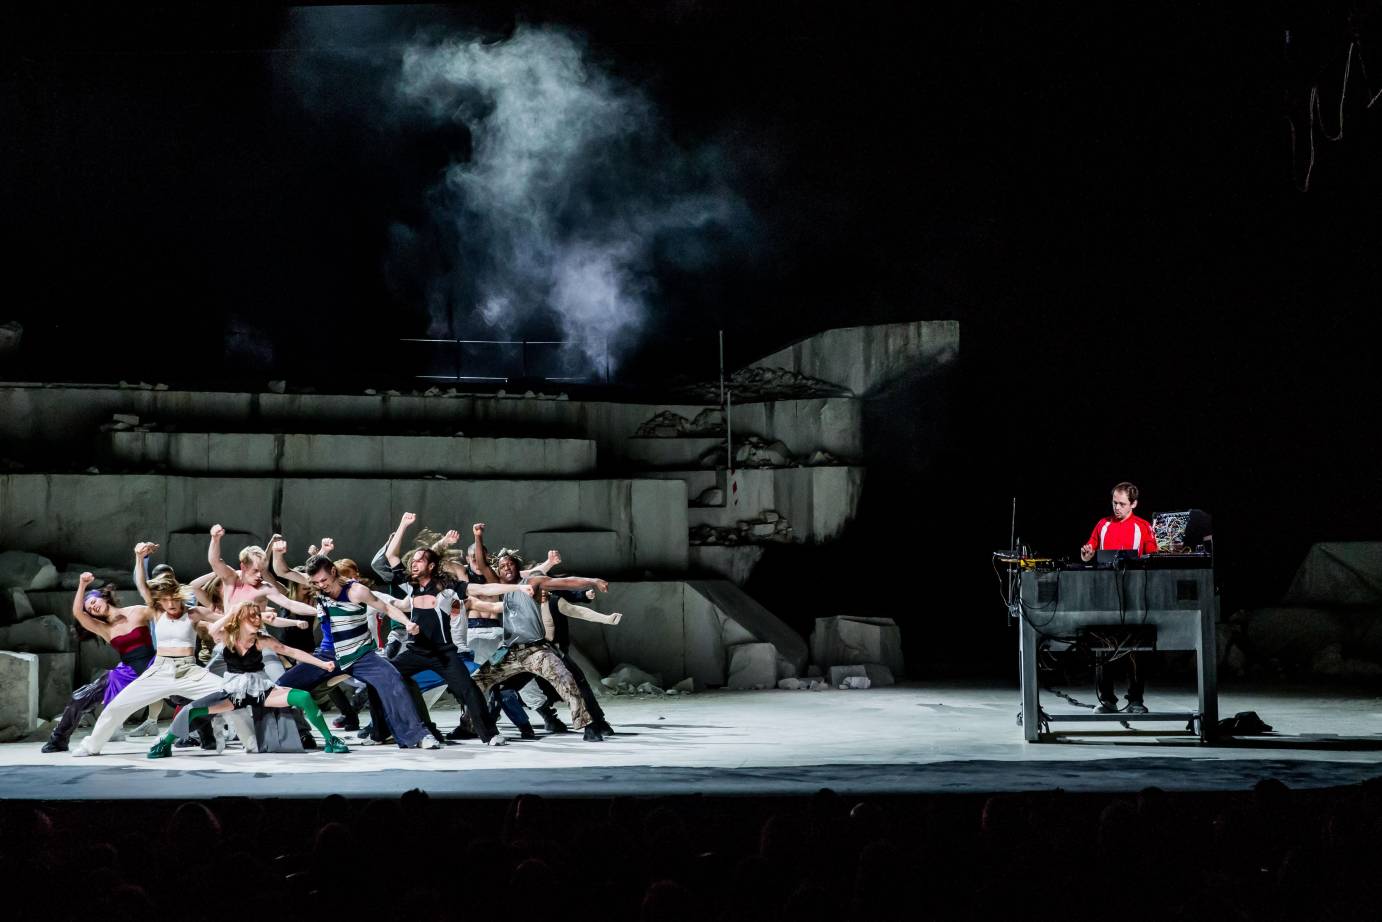 as the DJ Rone wearing a red shirt is off to one side of the stage laying beats down, a group of dancers perhas around twenty in street clothes, lift one fist in the air as if ready to fight, punch or rebel. behind them is a partially decimated concrete structure, smoke rises from the top of the structure